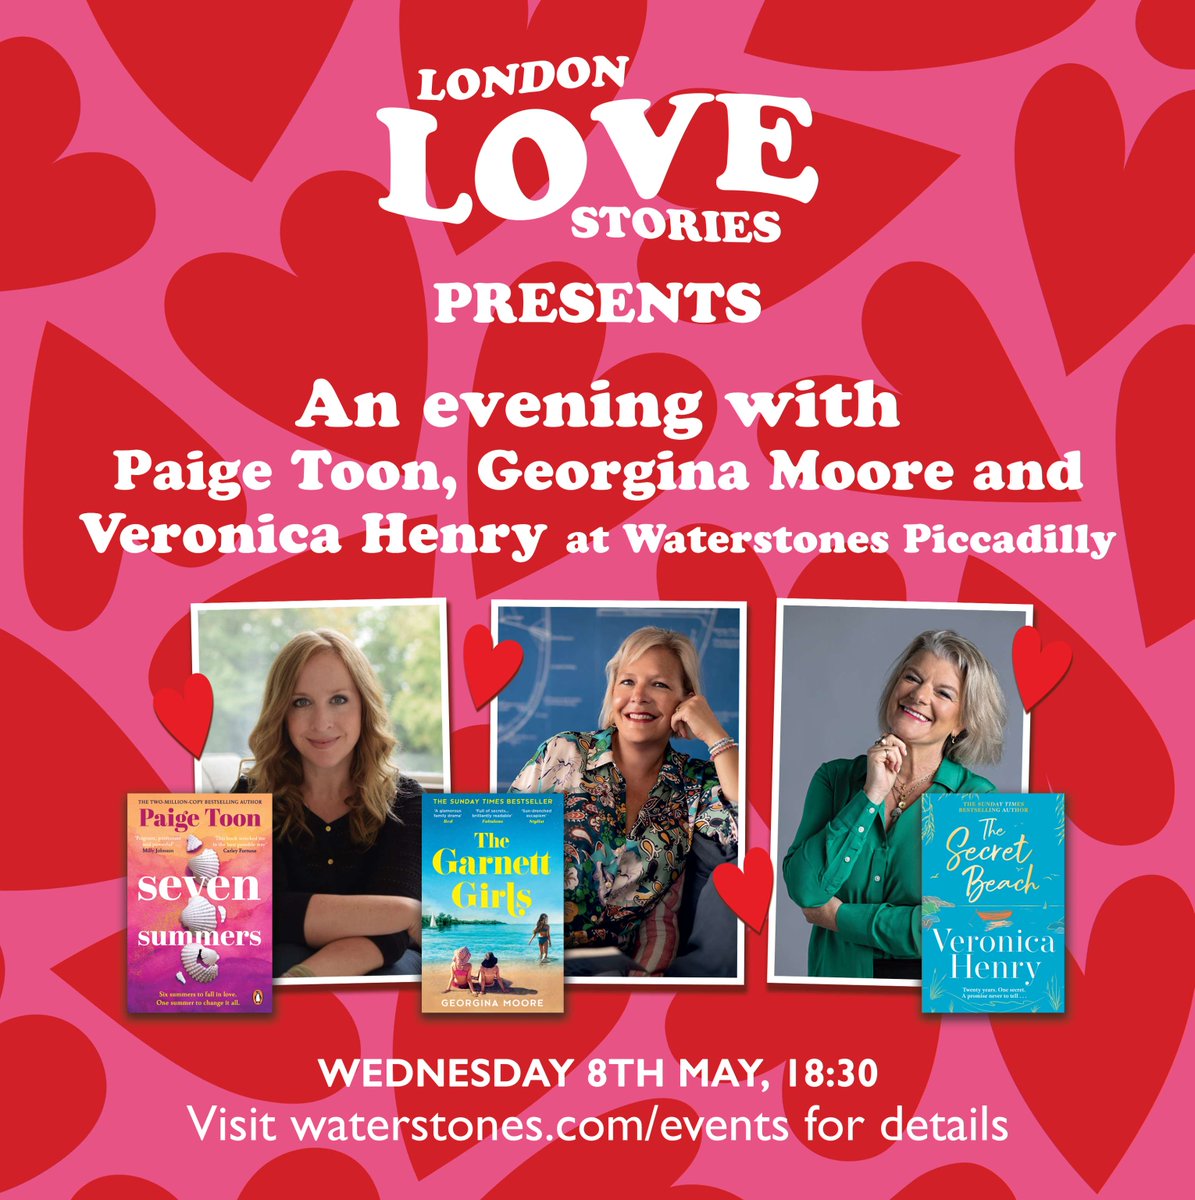 FINAL CALL FOR LOVE ❤ 
London Love Stories presents an evening with Paige Toon, Georgina Moore and Veronica Henry at Waterstones Piccadilly tomorrow night.
🎫 waterstones.com/events/london-…
#RespectRomance
@Waterstonespicc
@publicitybooks
@paigetoonauthor
@veronica_henry